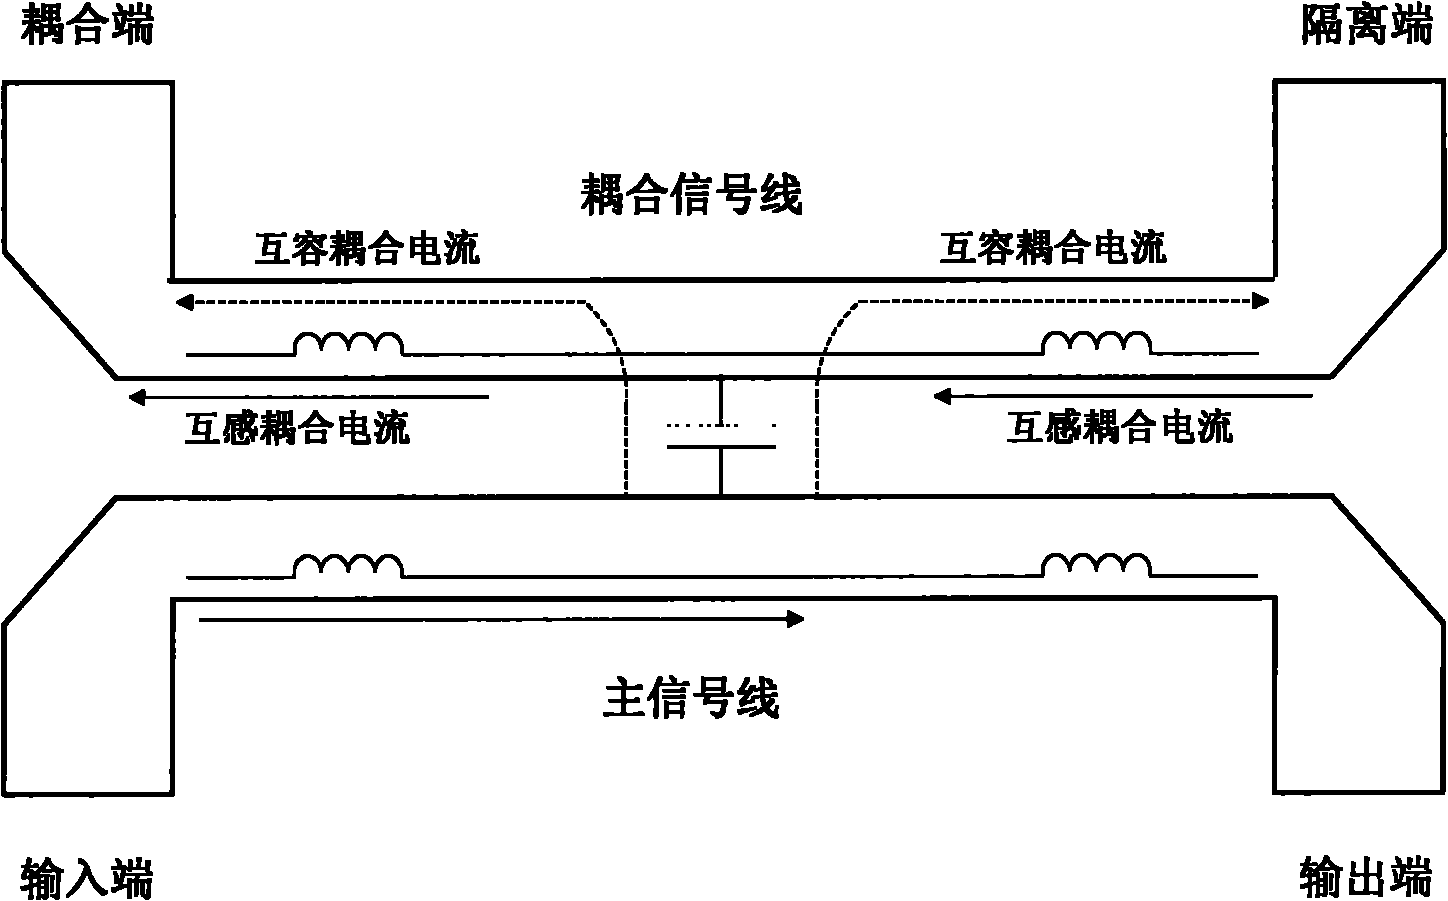 Coupler and power amplification system